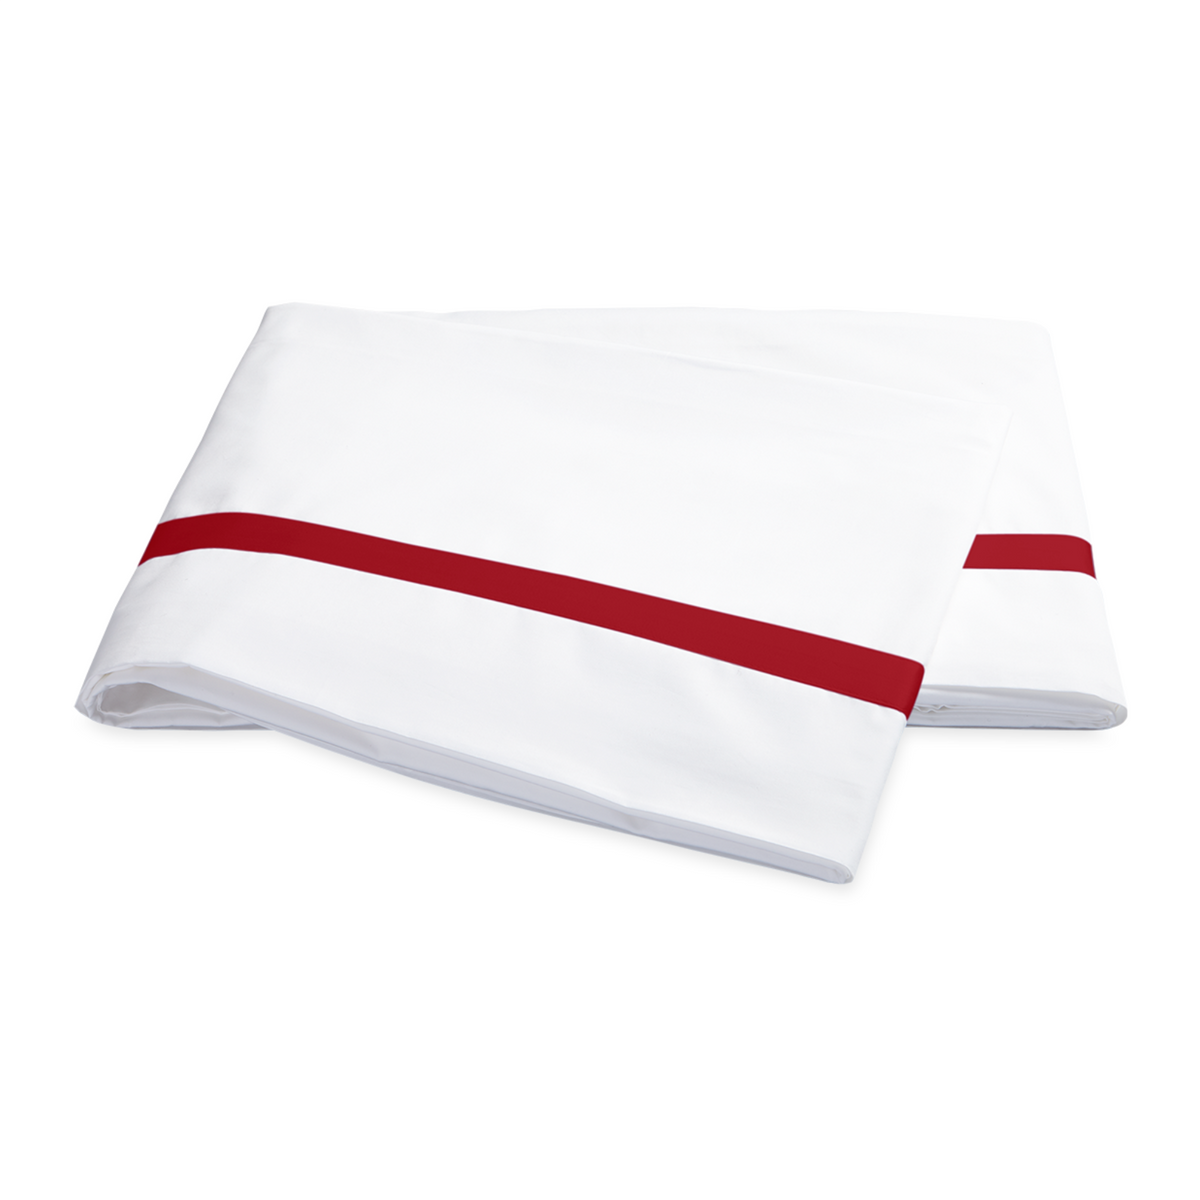 Folded Flat Sheet of Matouk Lowell Bedding Pillowcases in Scarlet Color